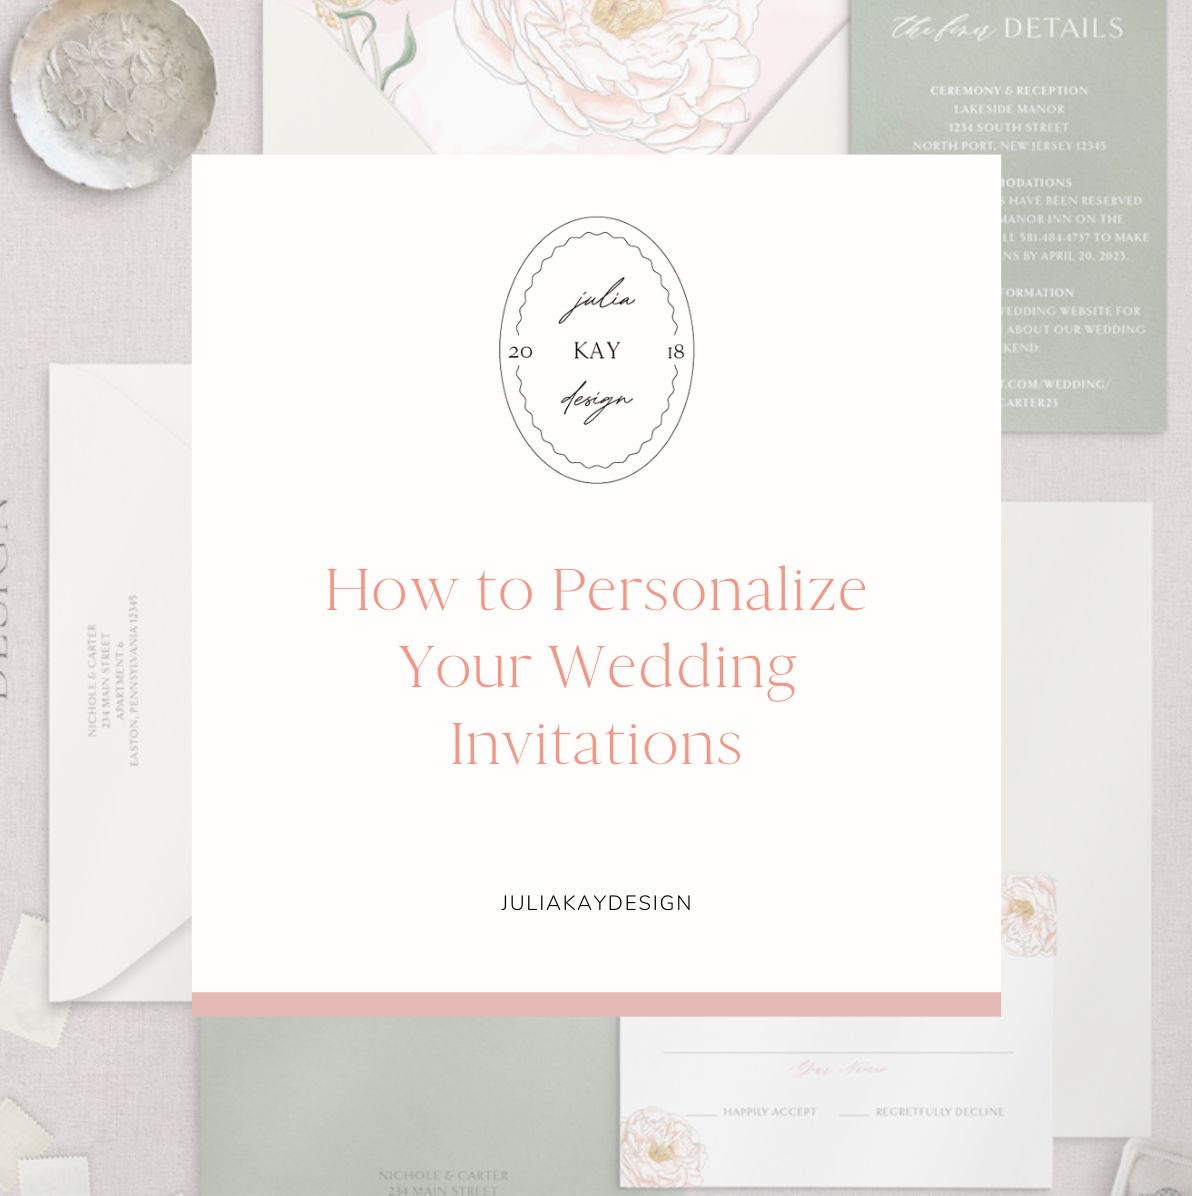 How to Personalize Your Wedding Invitations